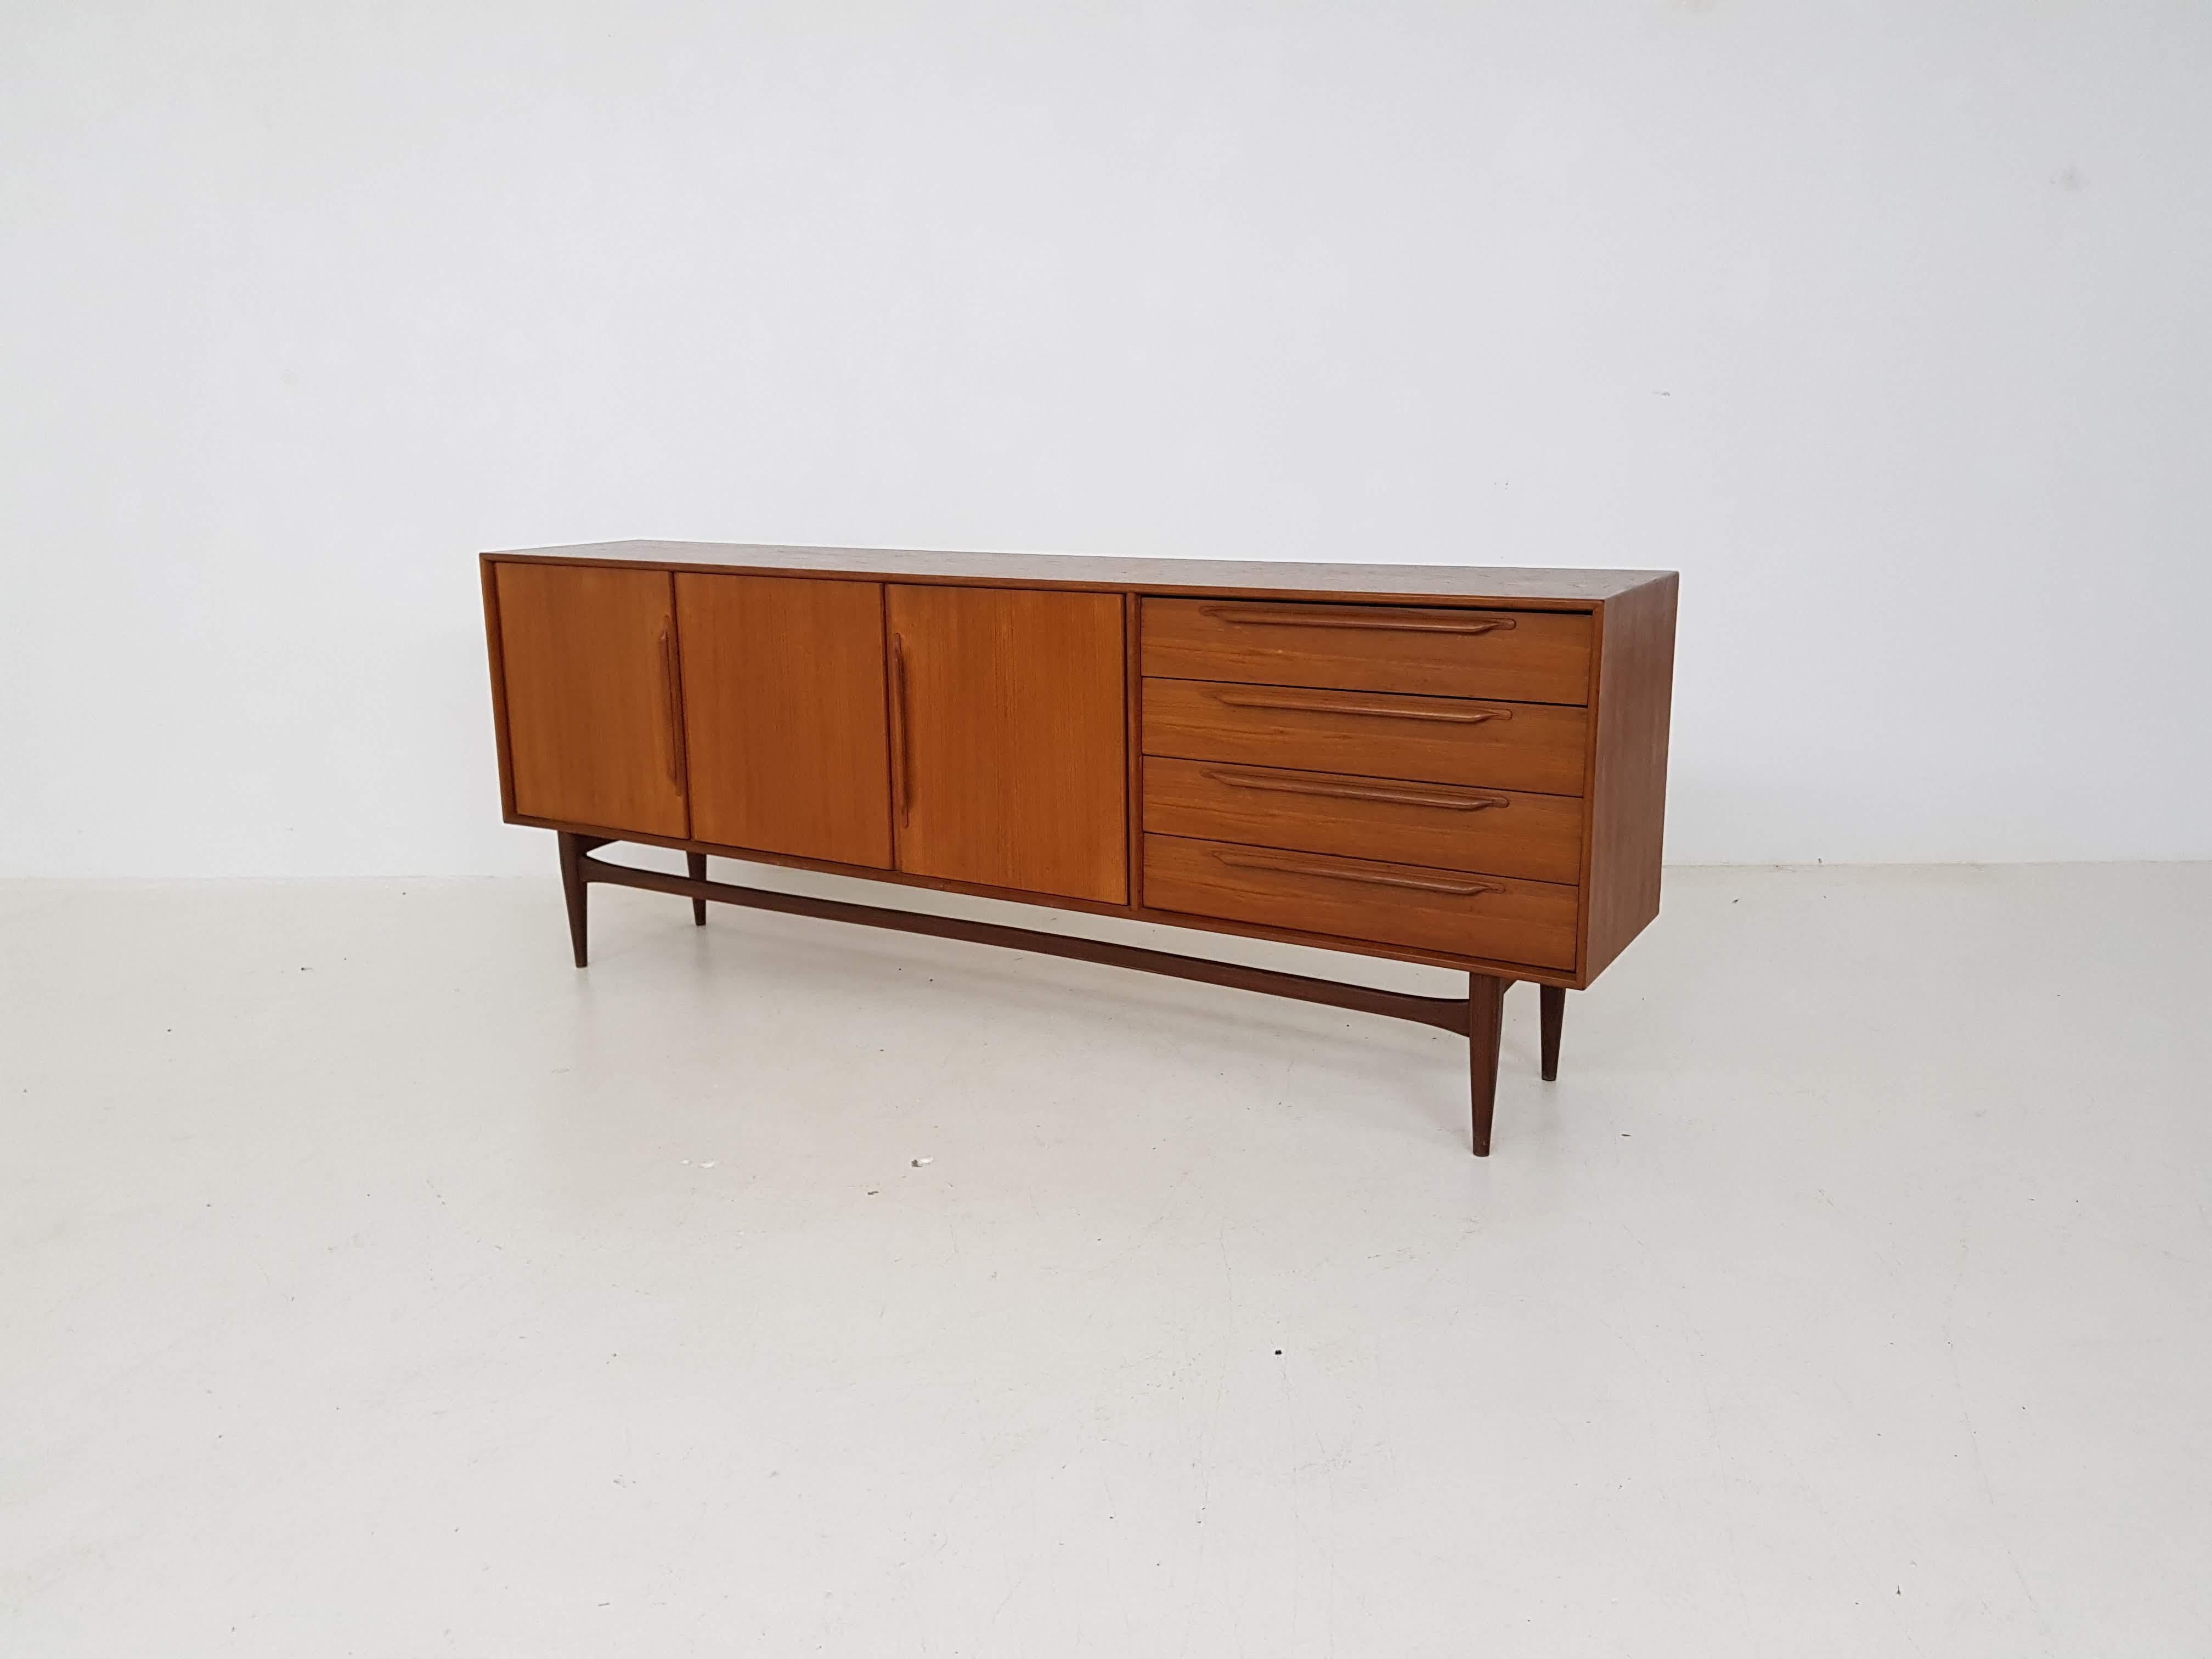 Large “Type 214” teak sideboard by Heinrich Riestenpatt / RT Möbel, Germany, 1960s.

German made sideboard in good condition and beautifully crafted. Soem traces of use. It is a fairly big credenza with its length of 225cm.

Heinrich Riestenpatt